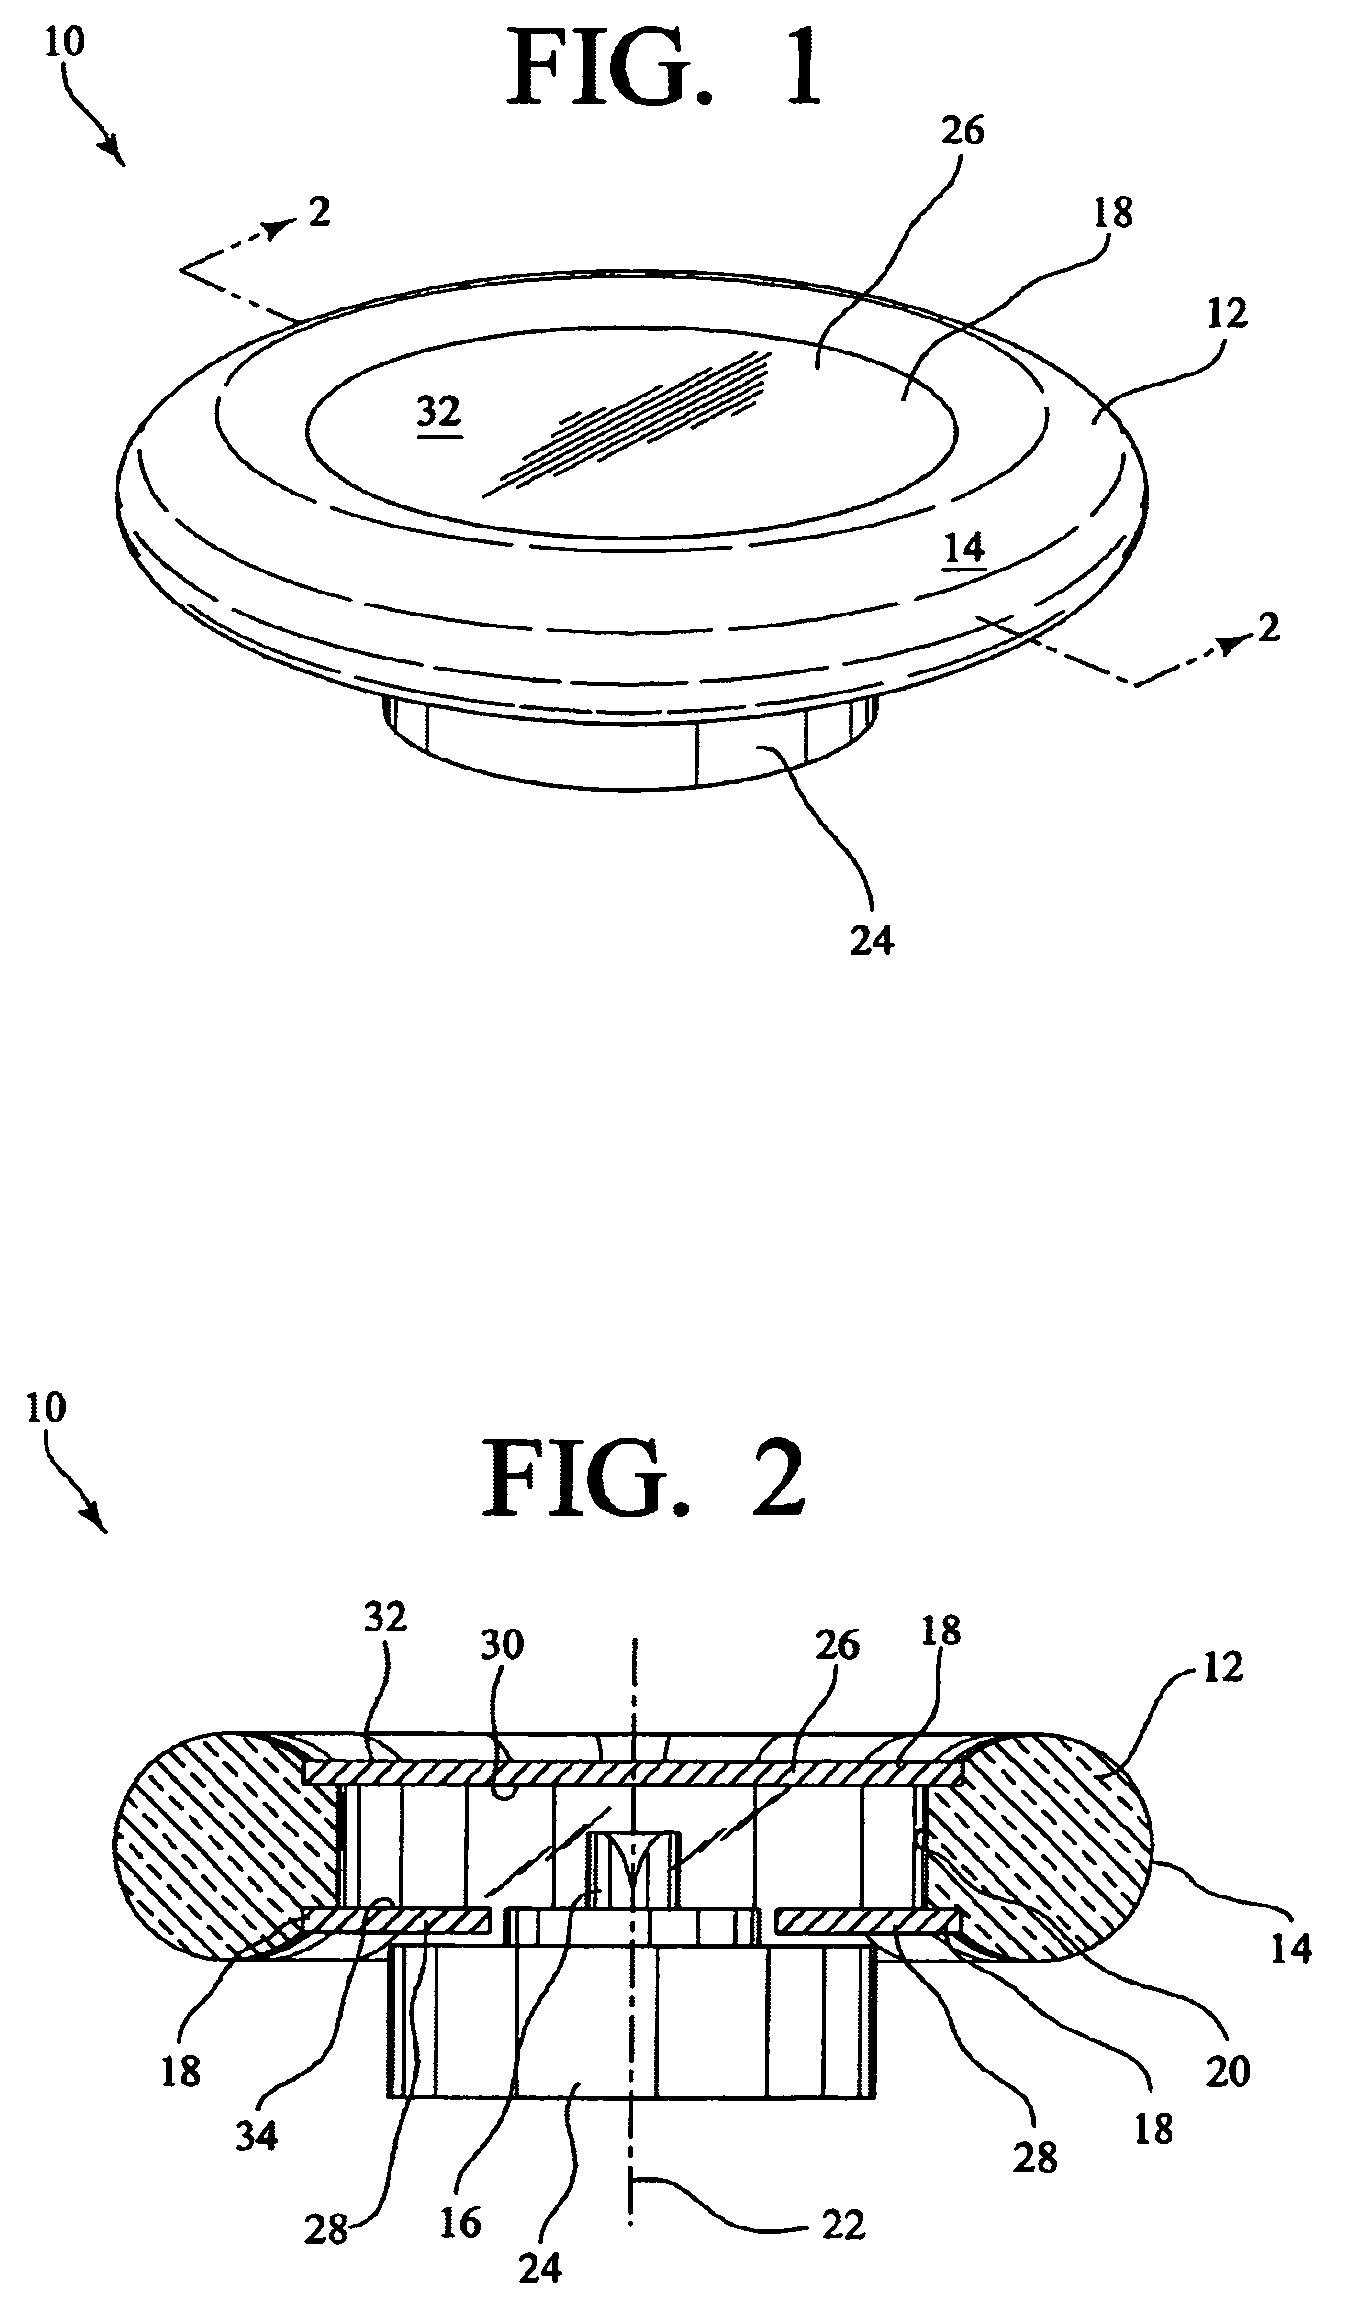 Illumination device for simulating neon or similar lighting in the shape of a toroid